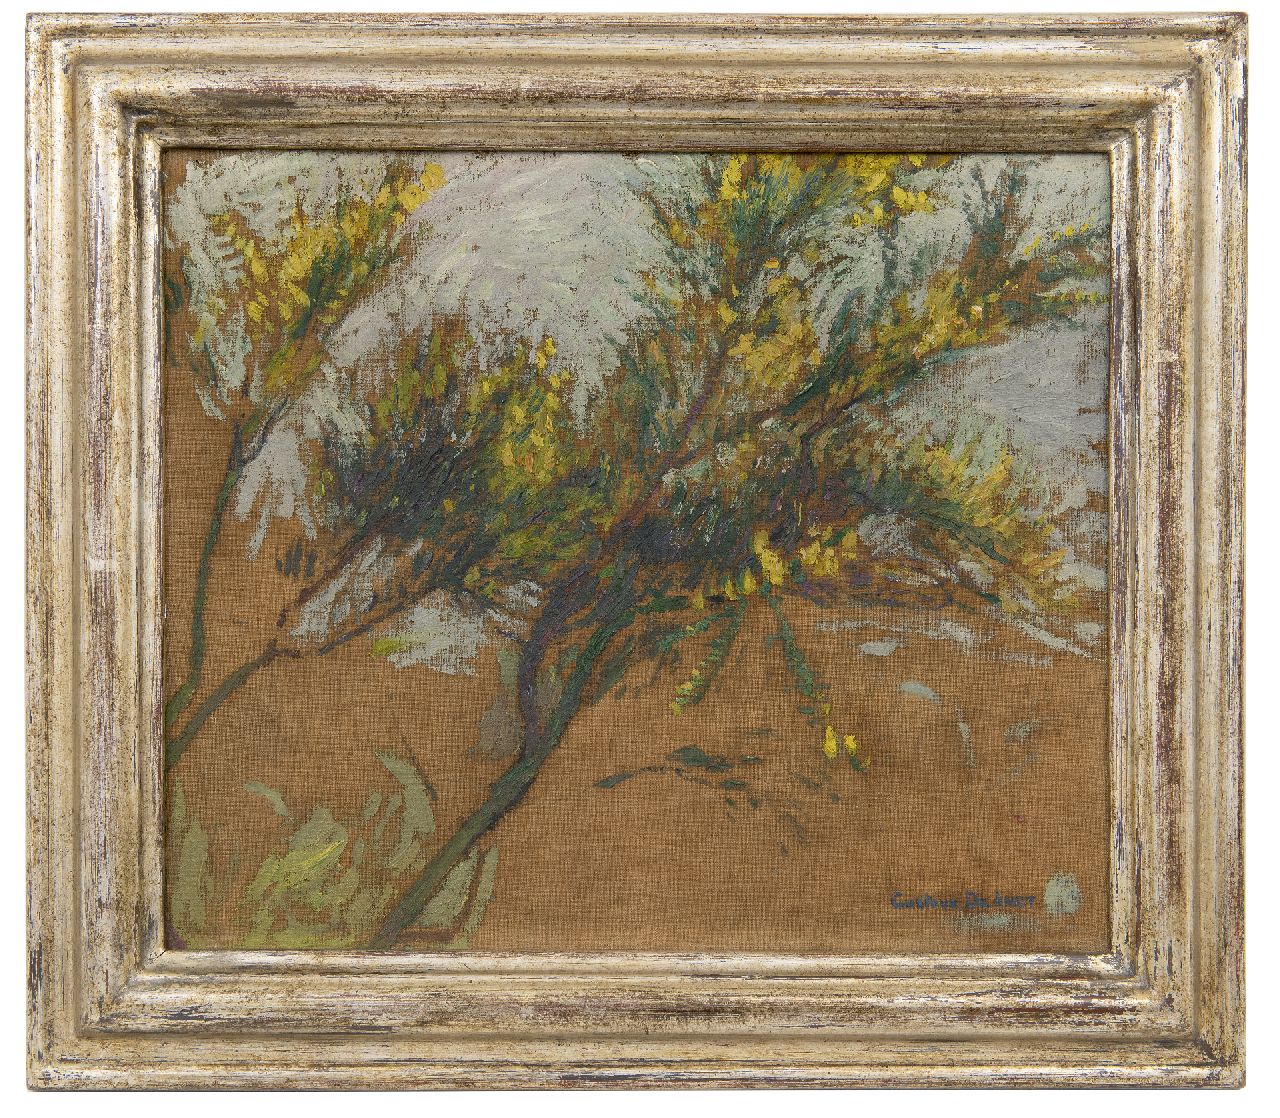 Smet G. de | Gustave de Smet | Paintings offered for sale | Tree study, oil on canvas 33.2 x 40.0 cm, signed l.r.